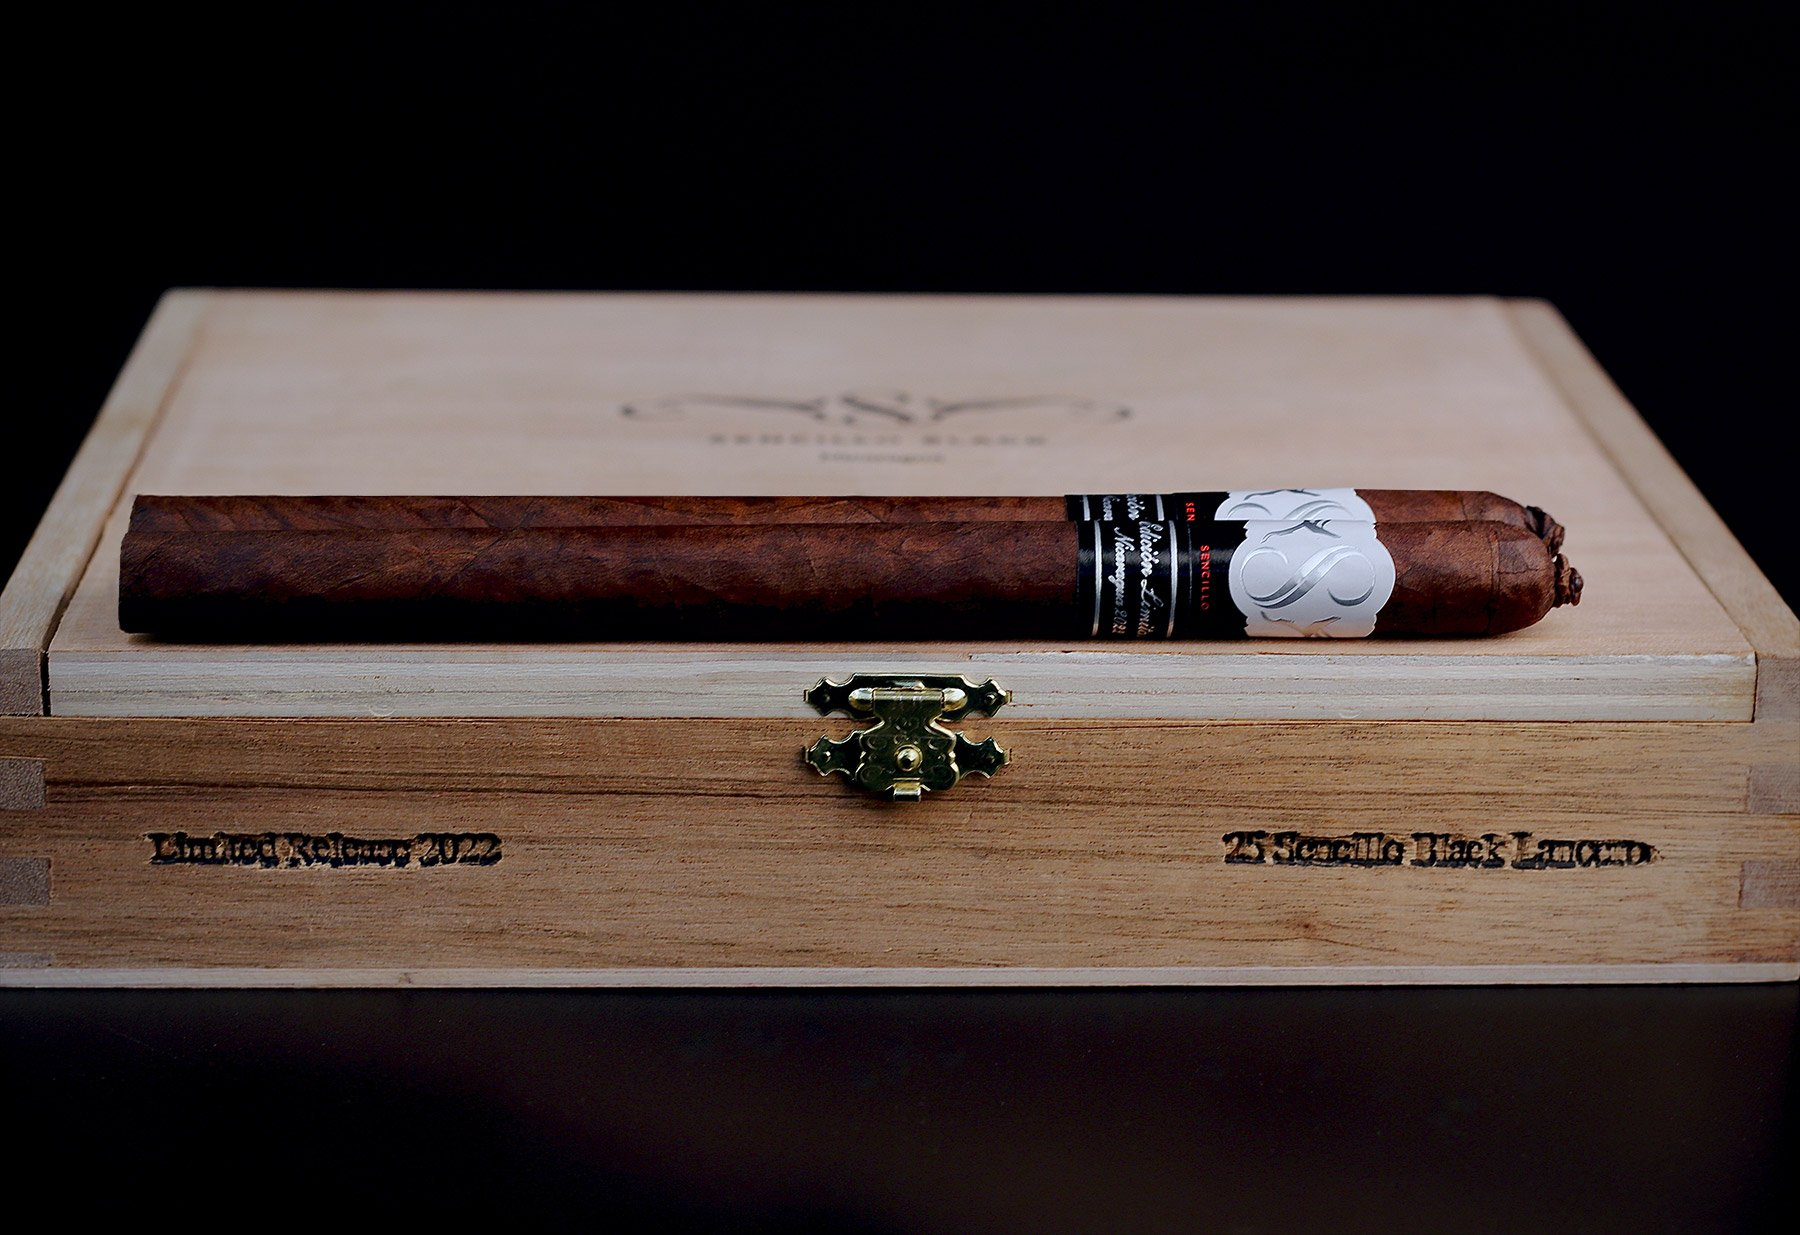 A Sencillo Platinum cigar, the first release of the Sencillo brand with a Habano de Jamastran tobacco and a smooth, leathery taste